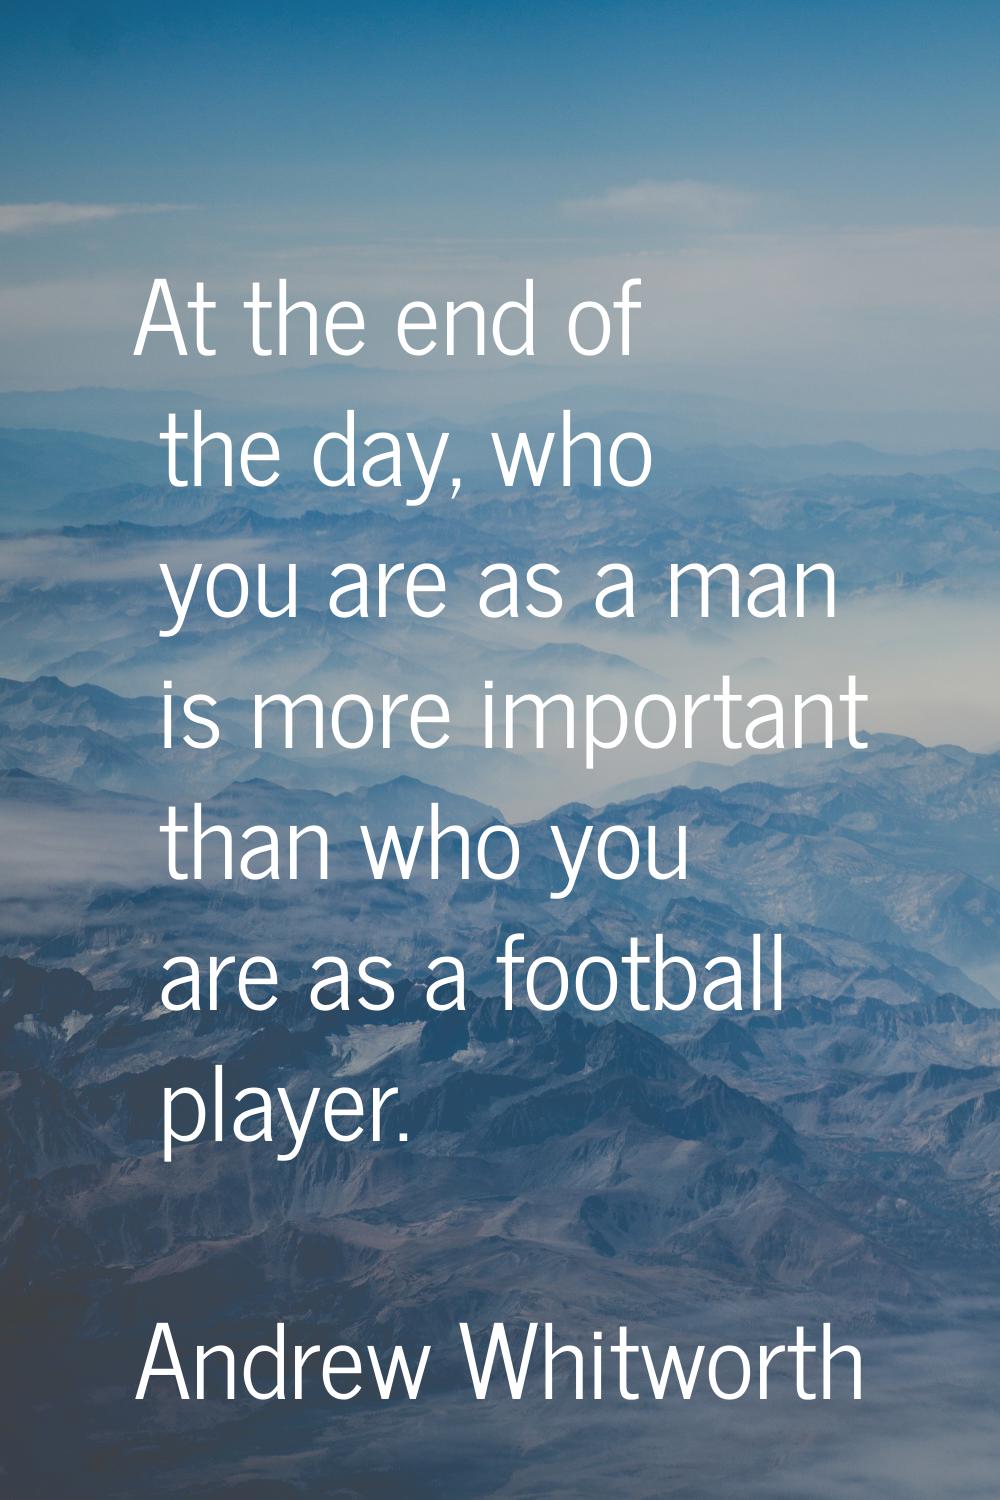 At the end of the day, who you are as a man is more important than who you are as a football player